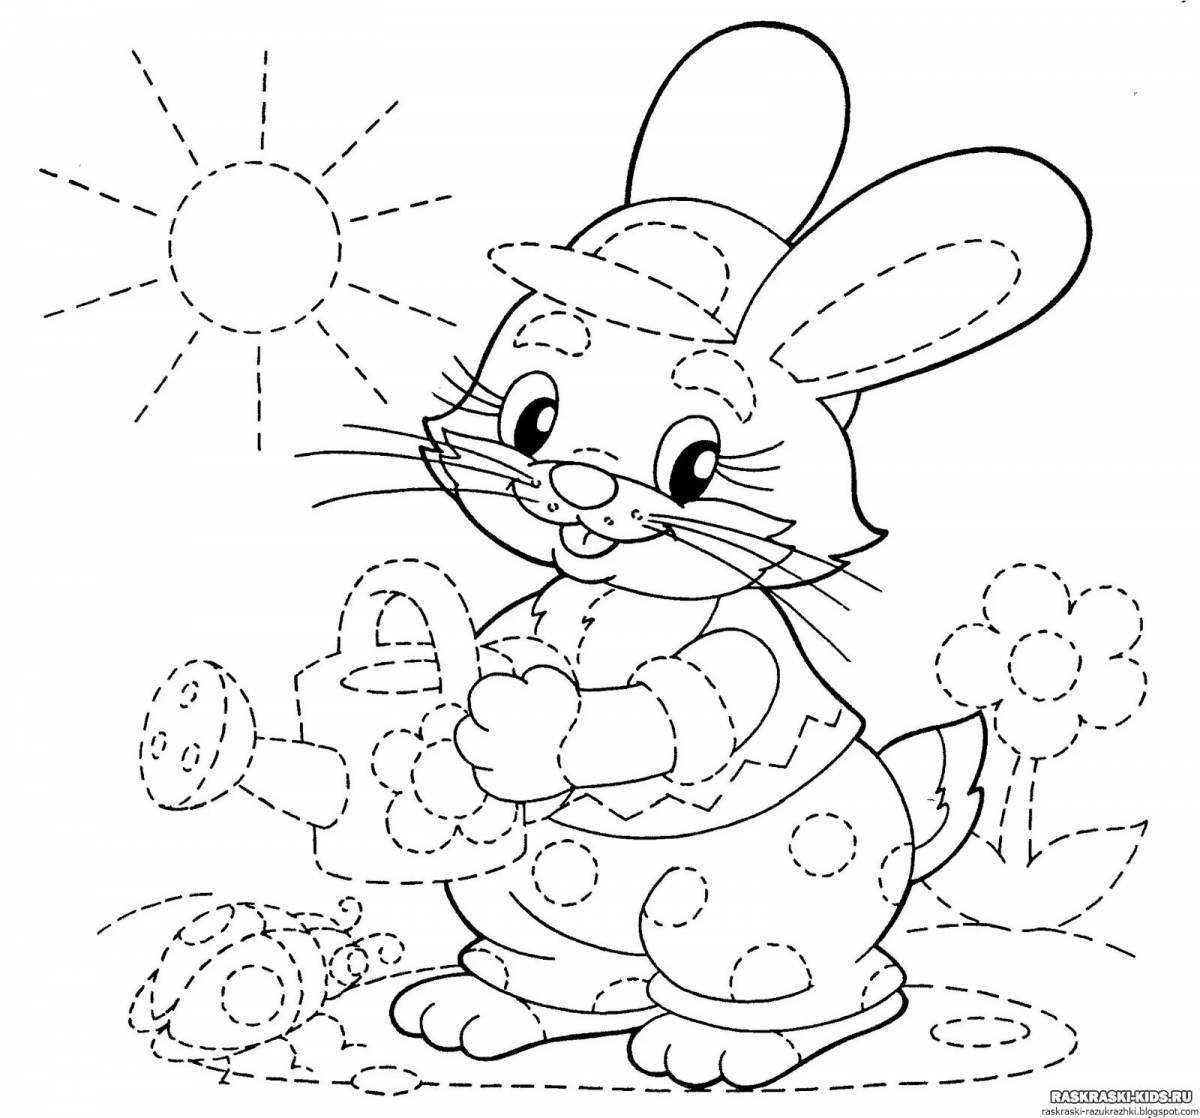 Color-frenzy coloring page for beginners